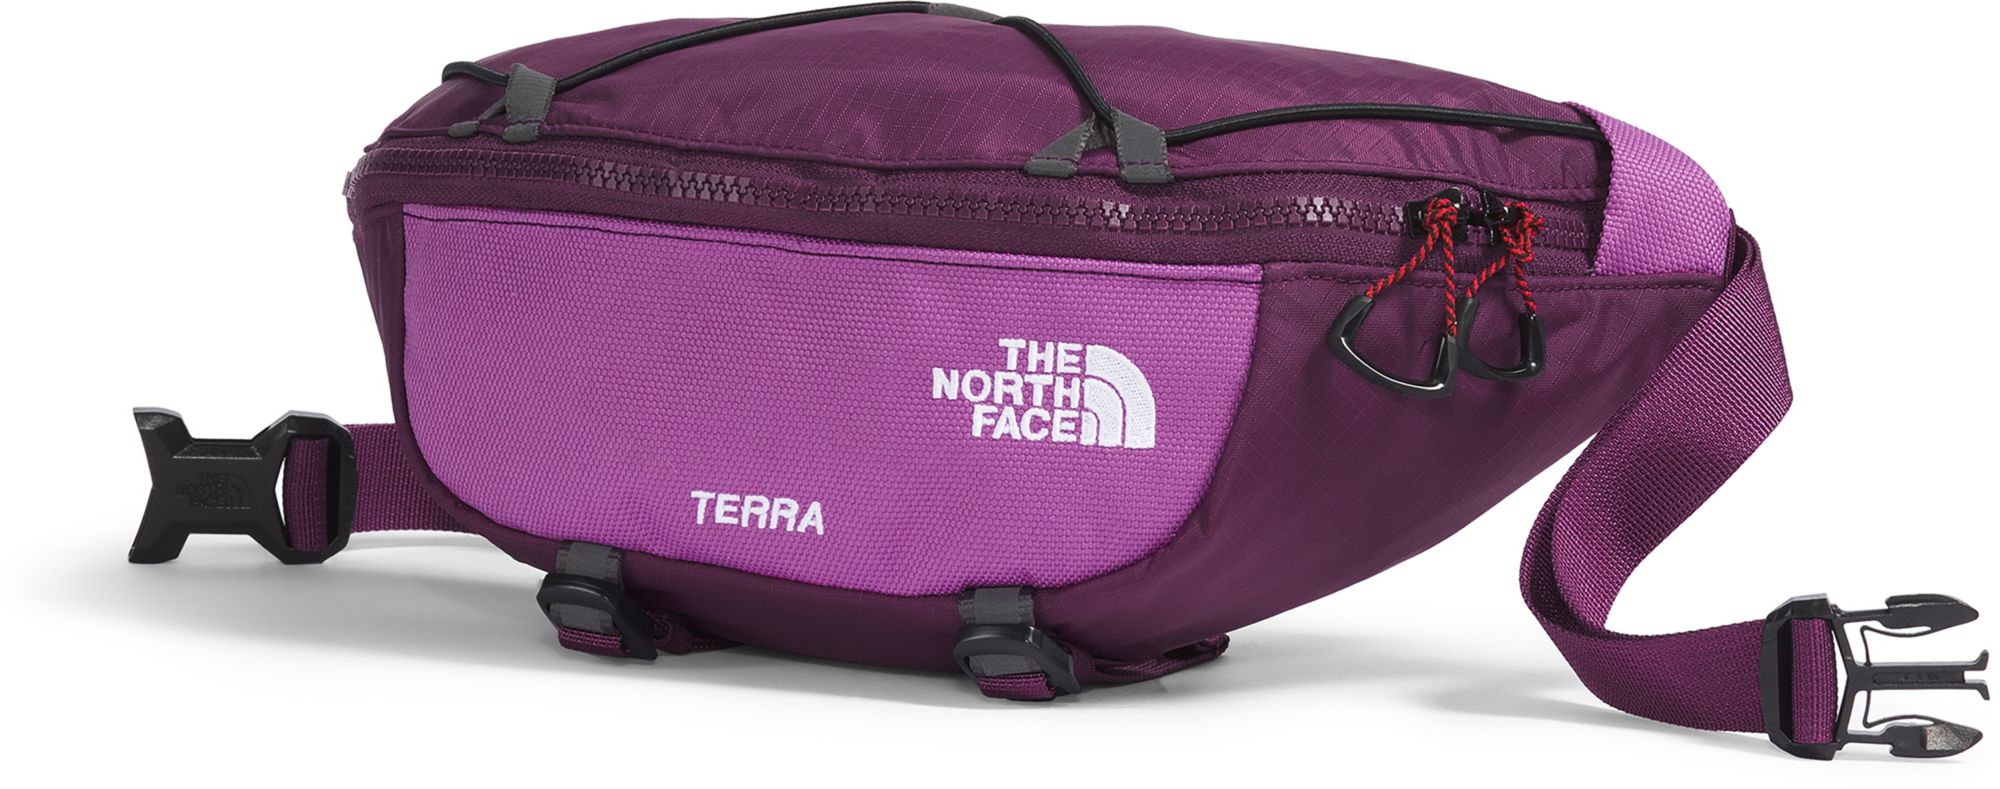 Photos - Outdoor Furniture The North Face Terra Lumbar Pack 3L, Men's, Black Currant Purple | Father' 